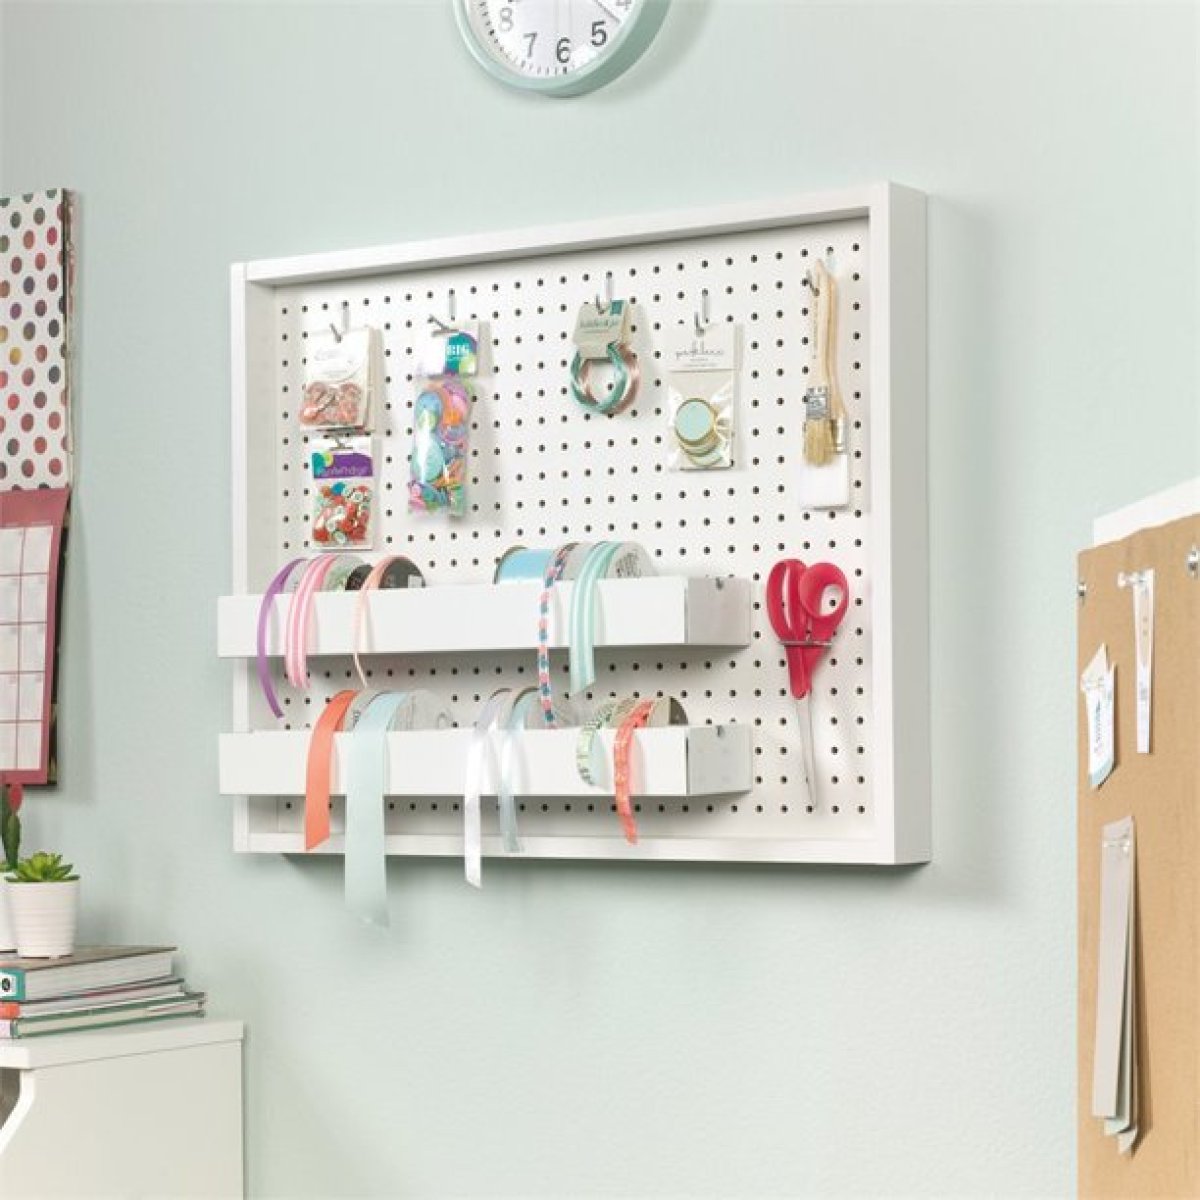 Sauder Craft Pro Series Pegboard with Trays